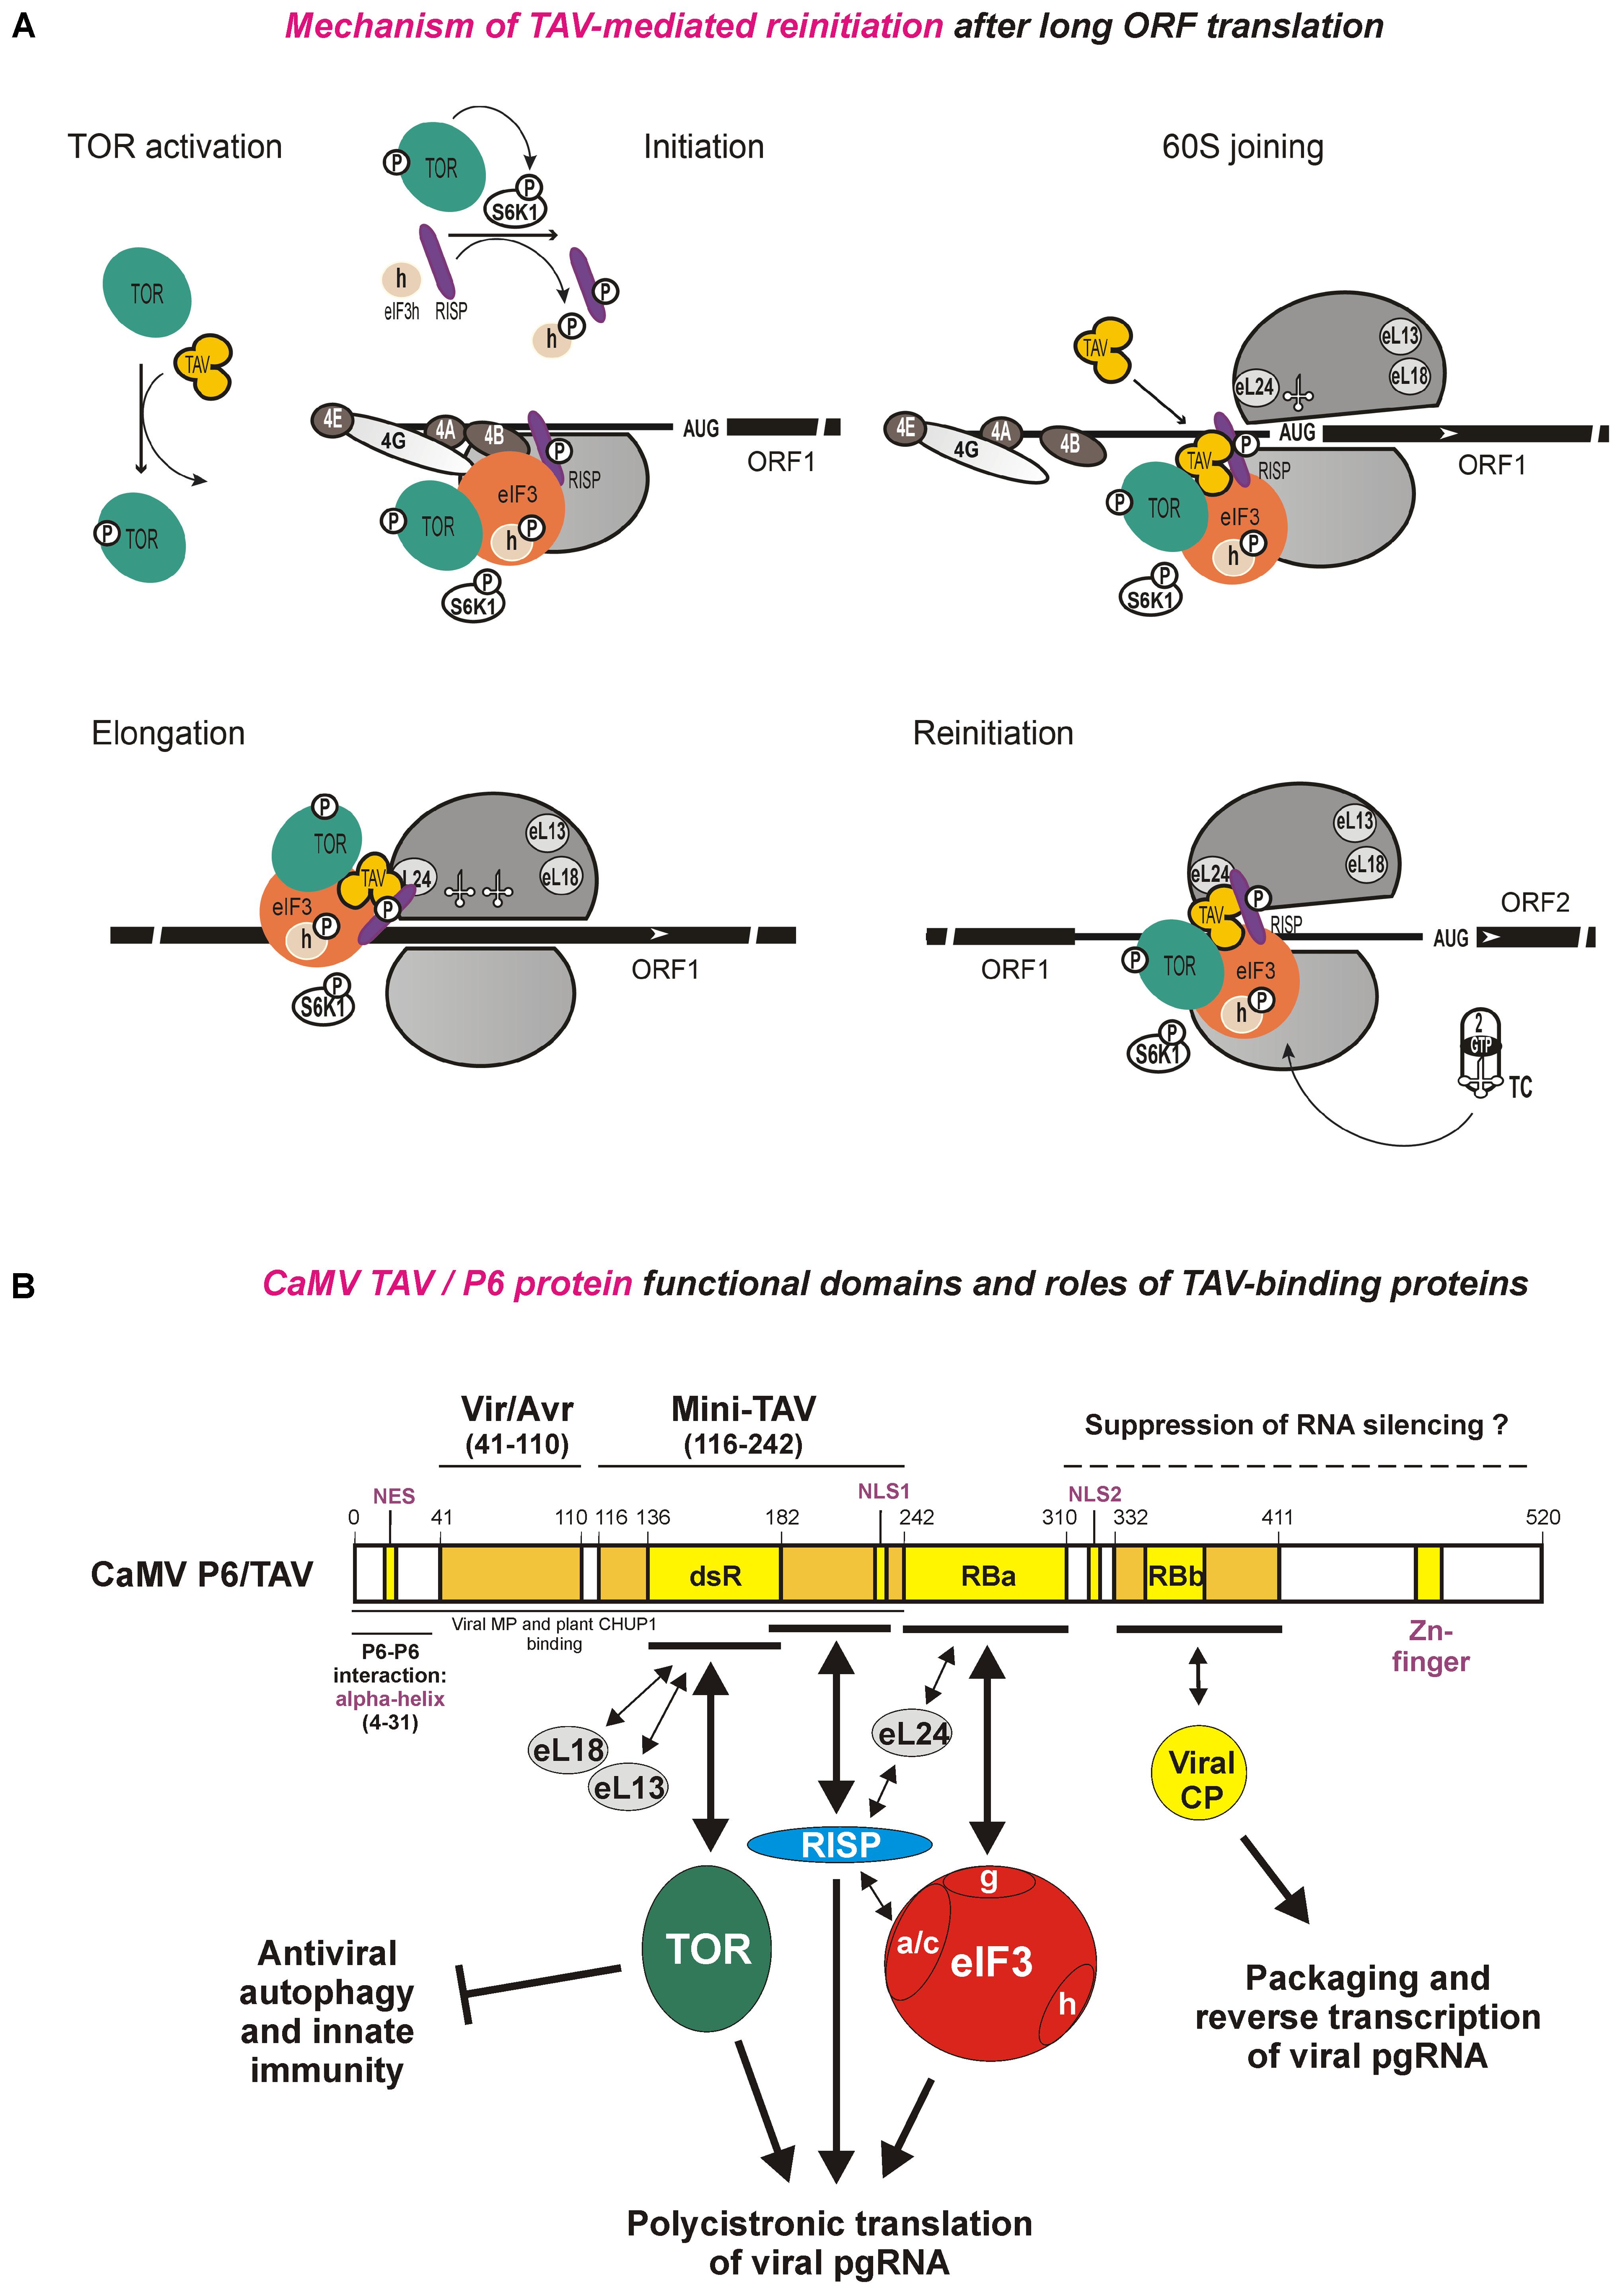 The SIV leader region can drive gene expression in a bicistronic RNA